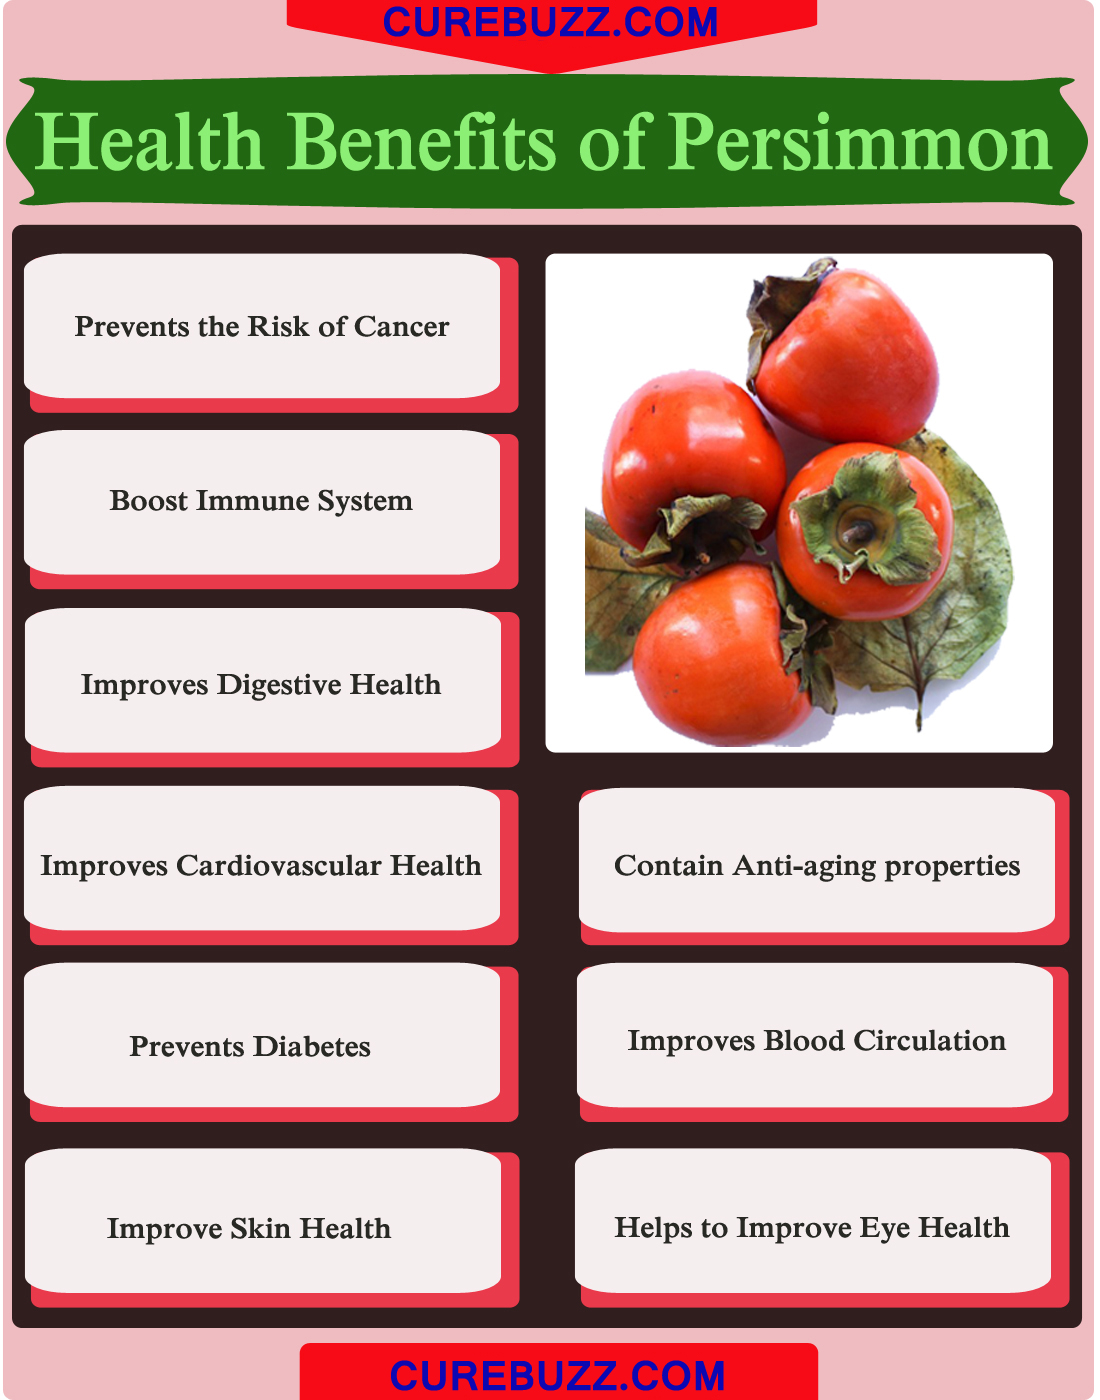 9 Health Benefits of Persimmon CUREBUZZ